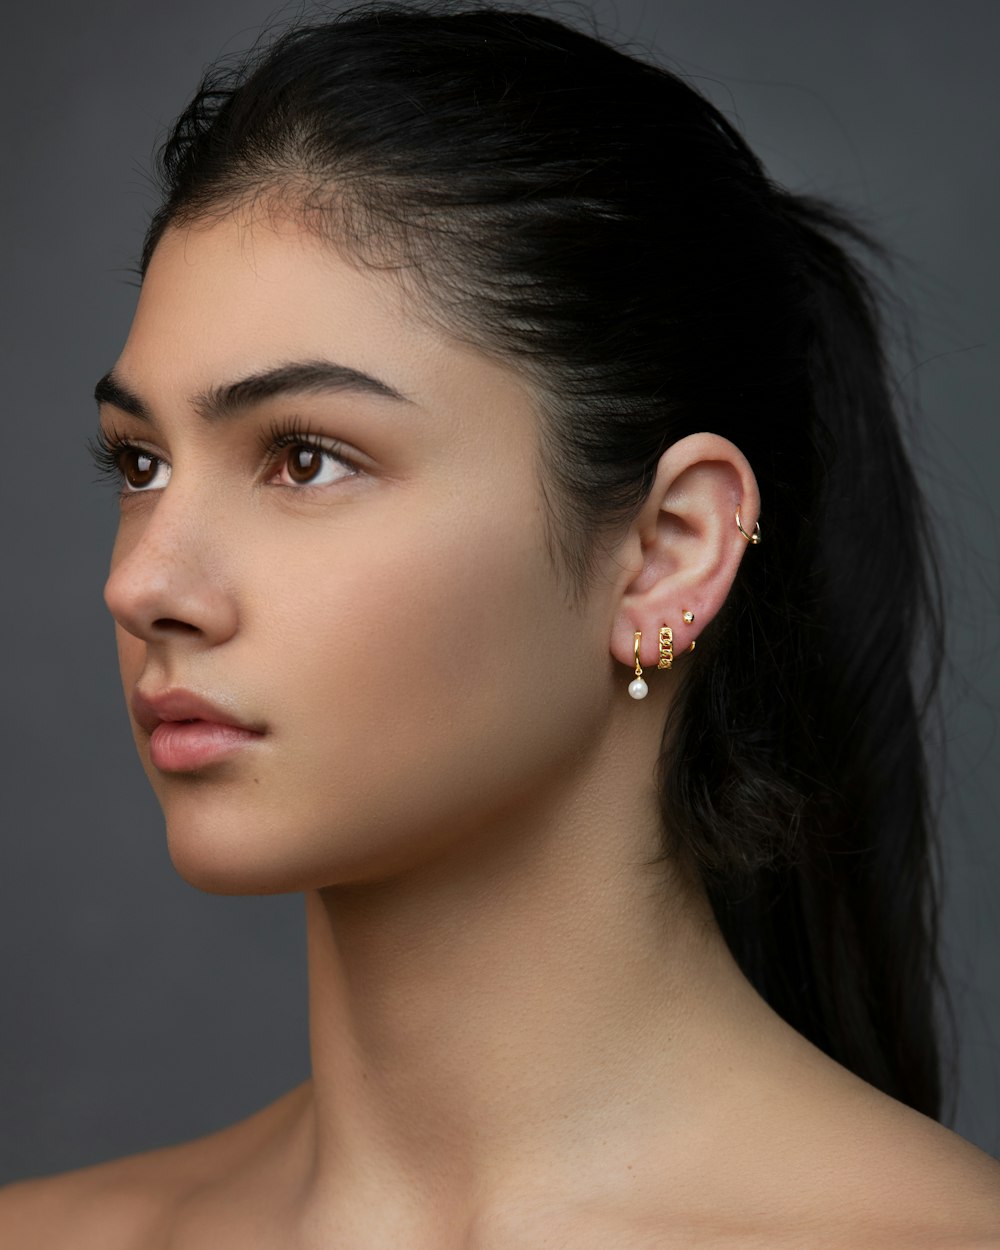 A woman with very large breast wearing earrings photo – Free Faces Image on  Unsplash